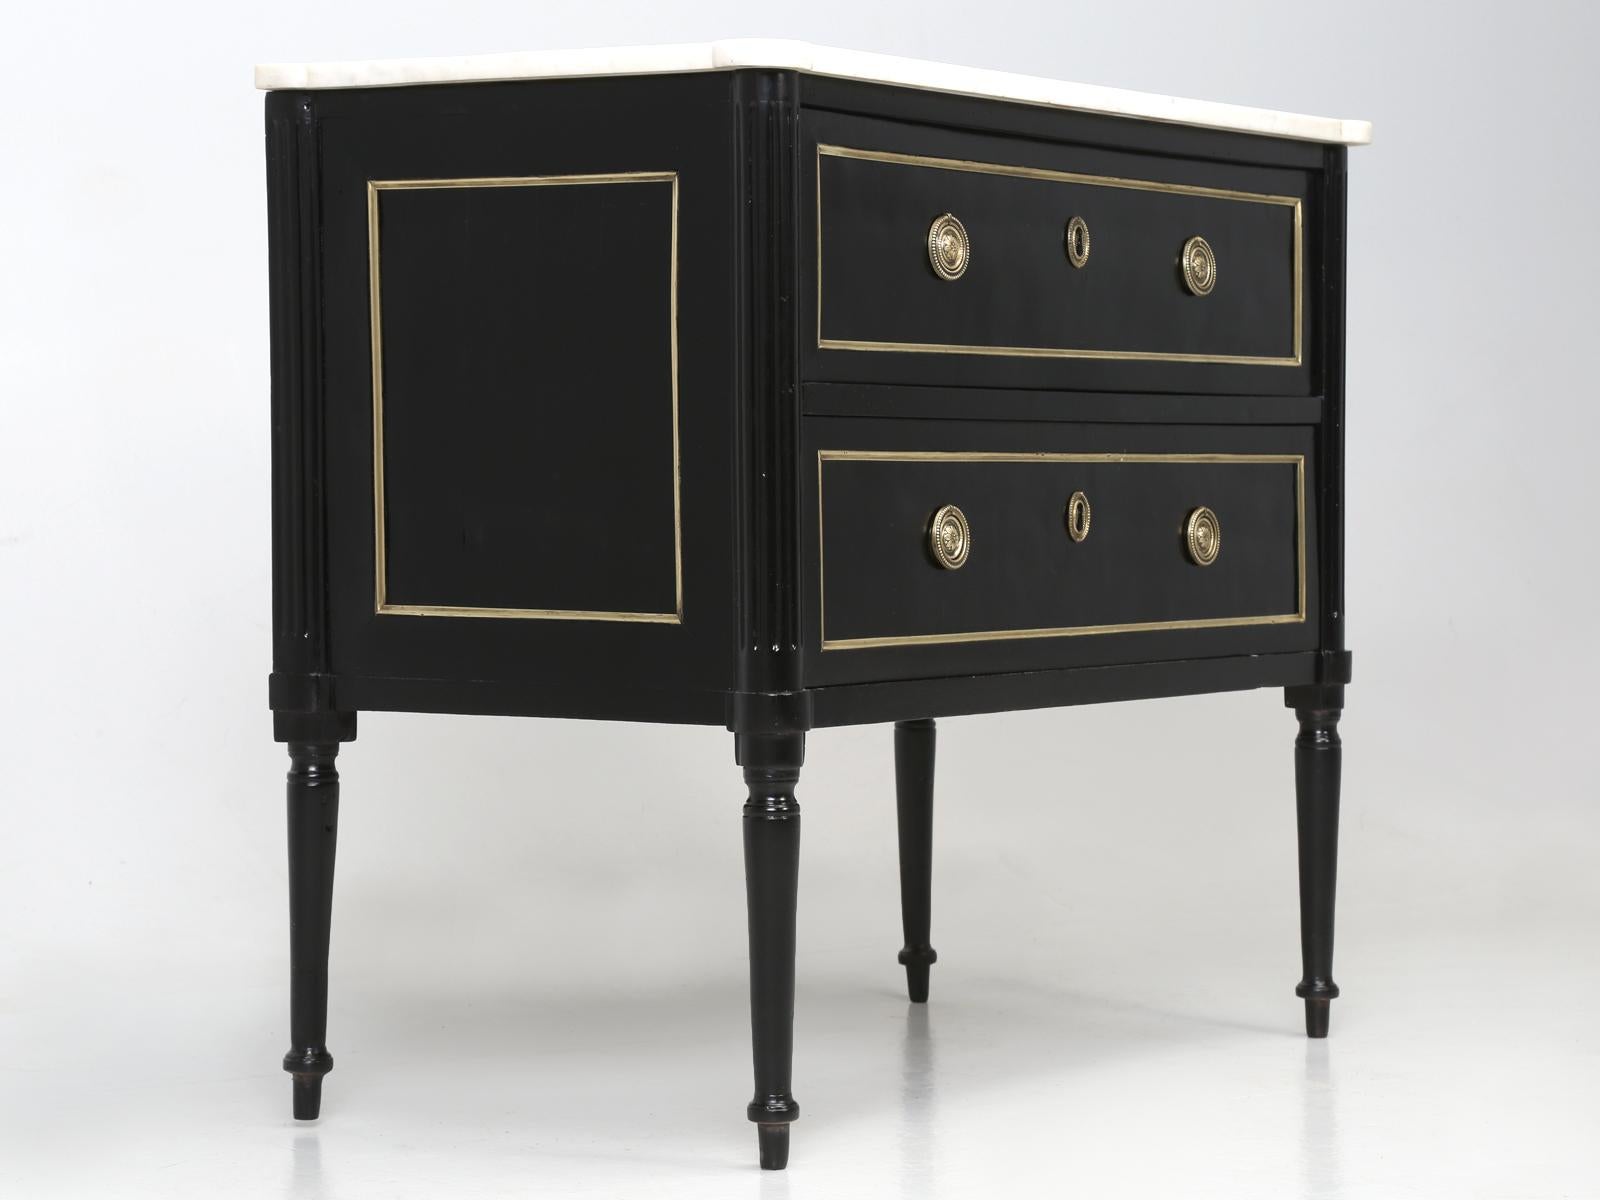 Antique French Louis XVI style mahogany cabinet that was ebonized. There are hairline cracks in the old finish, although admittedly they are difficult to see and certainly are no where near as visible as an old marble repair. The drawers function